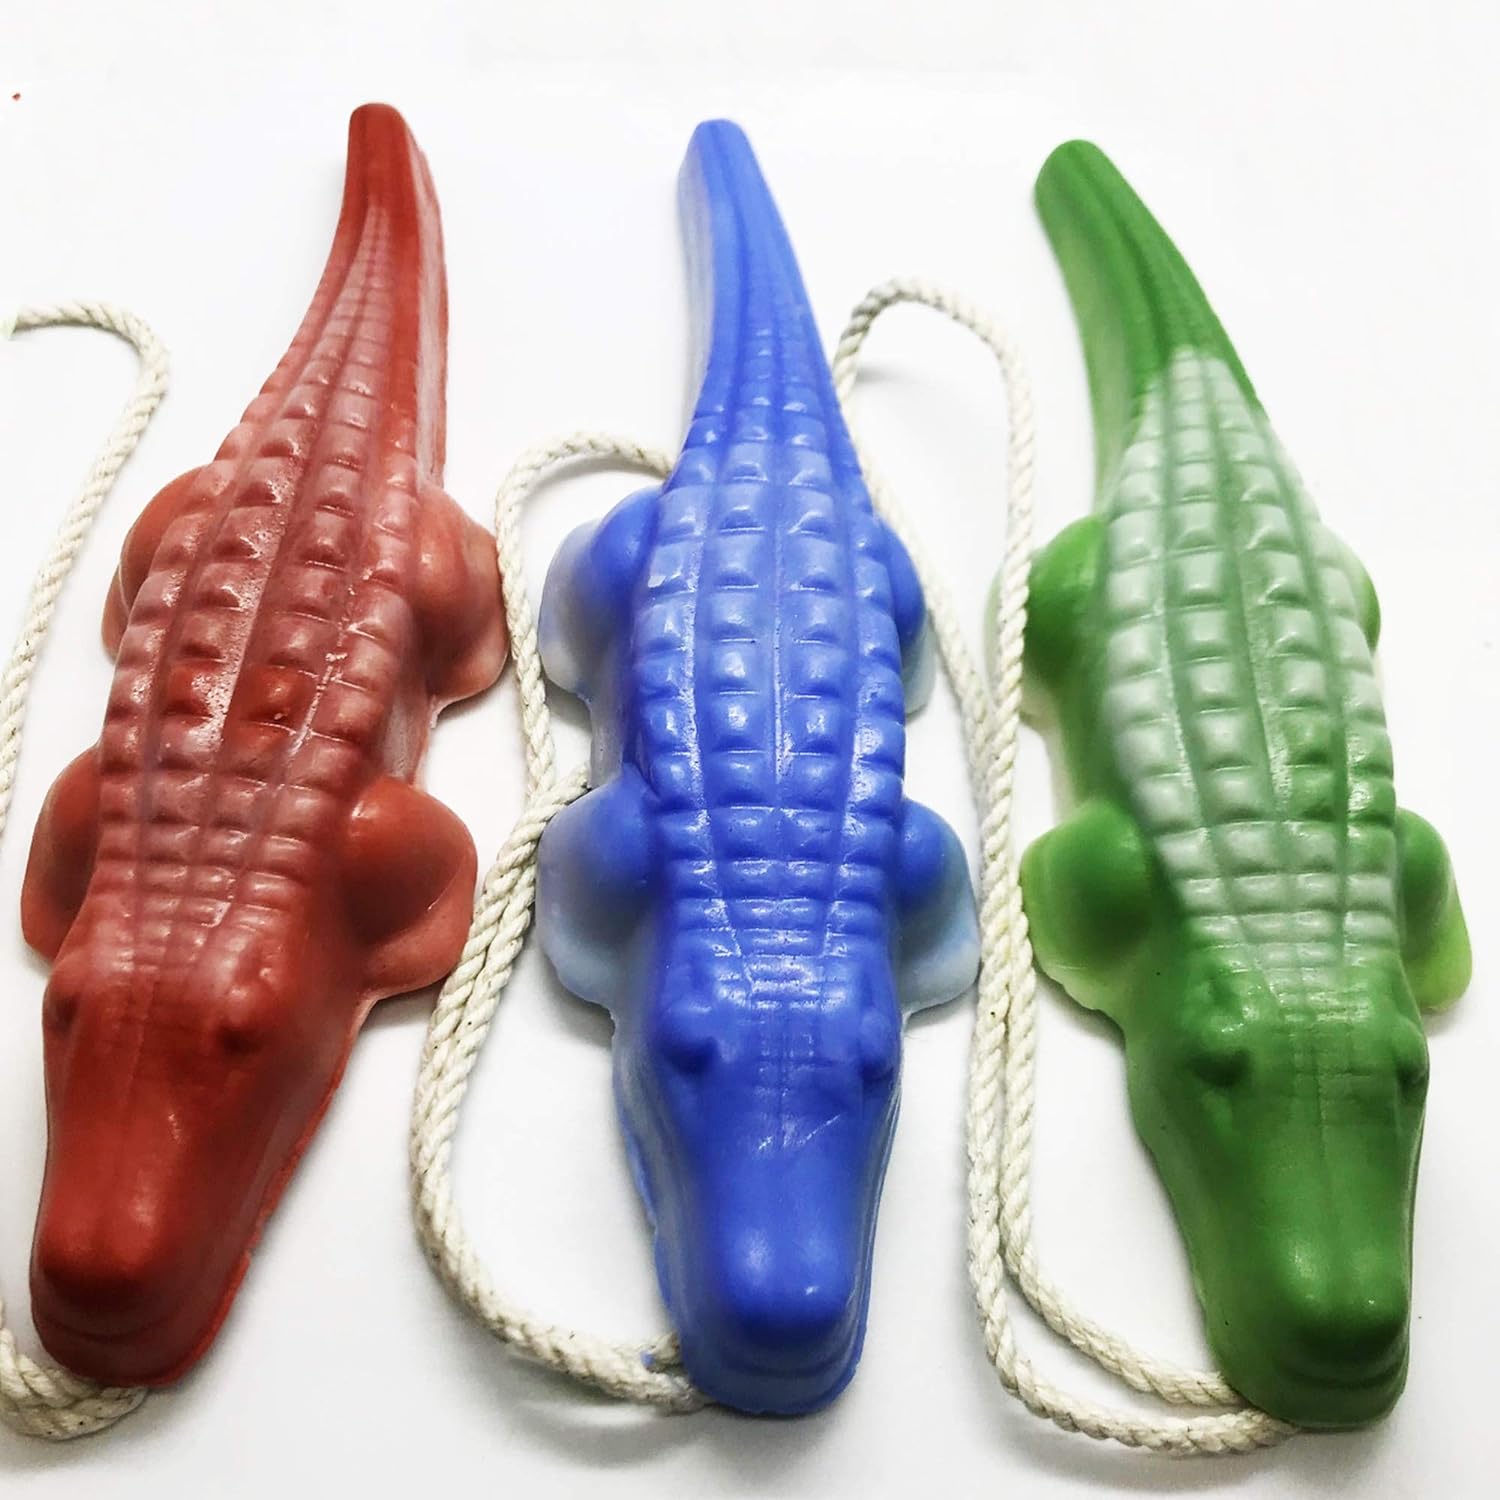 Alligator Soap on a Rope 3-Pack, orida Gators, Gifts for Mom, Funny Soap, Gifts for Him, Soap on a Rope for Kids, orida Gifts, Hand Soap, Antibacterial Soap